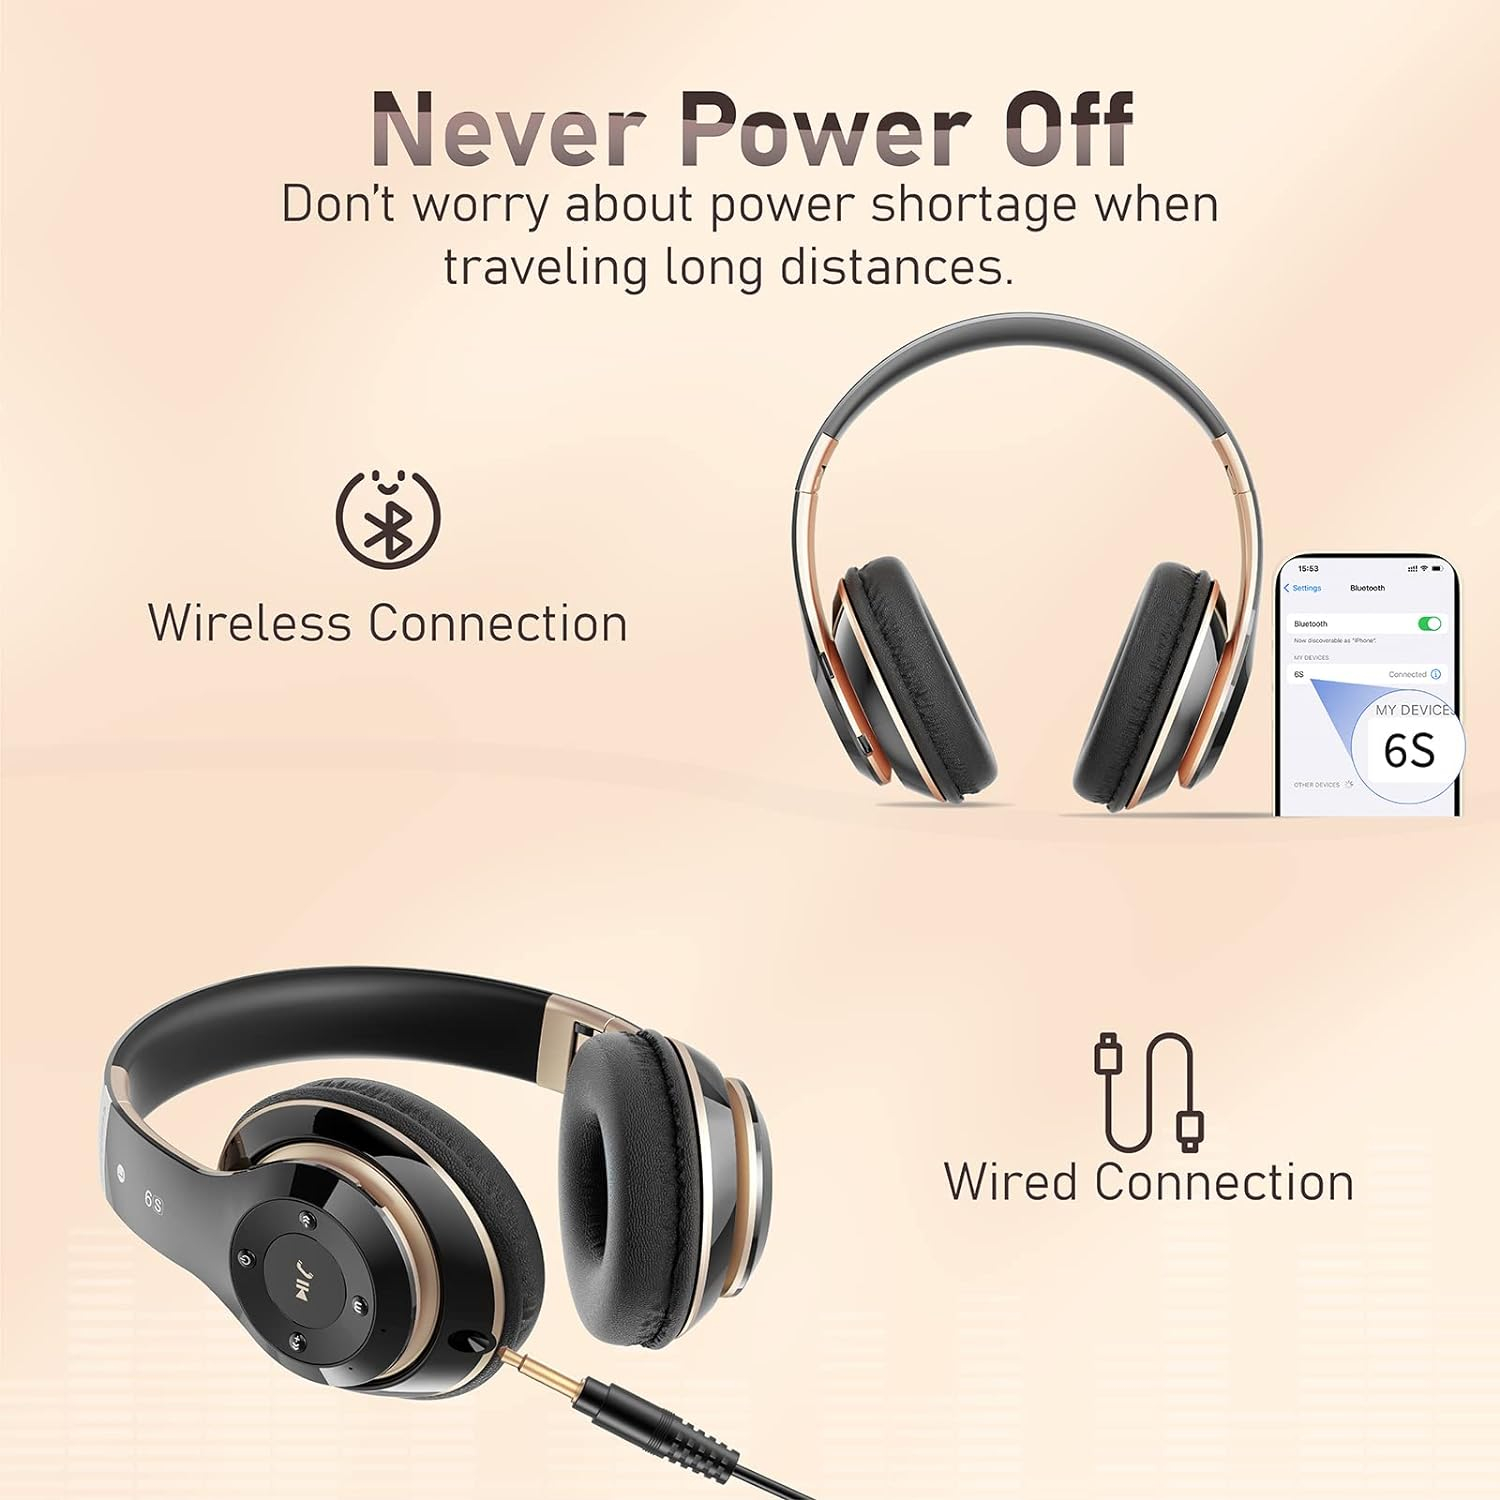 Bluetooth Headphones Over Ear, 6S Wireless Headphones Wired with 6 EQ Modes, 40 Hours Playtime Foldable HiFi Stereo Headset with Microphone, Soft Ear Pads, FM/TF for Cellphone/PC/Work (Black  Gold)                Wireless Technology: Bluetooth, FM